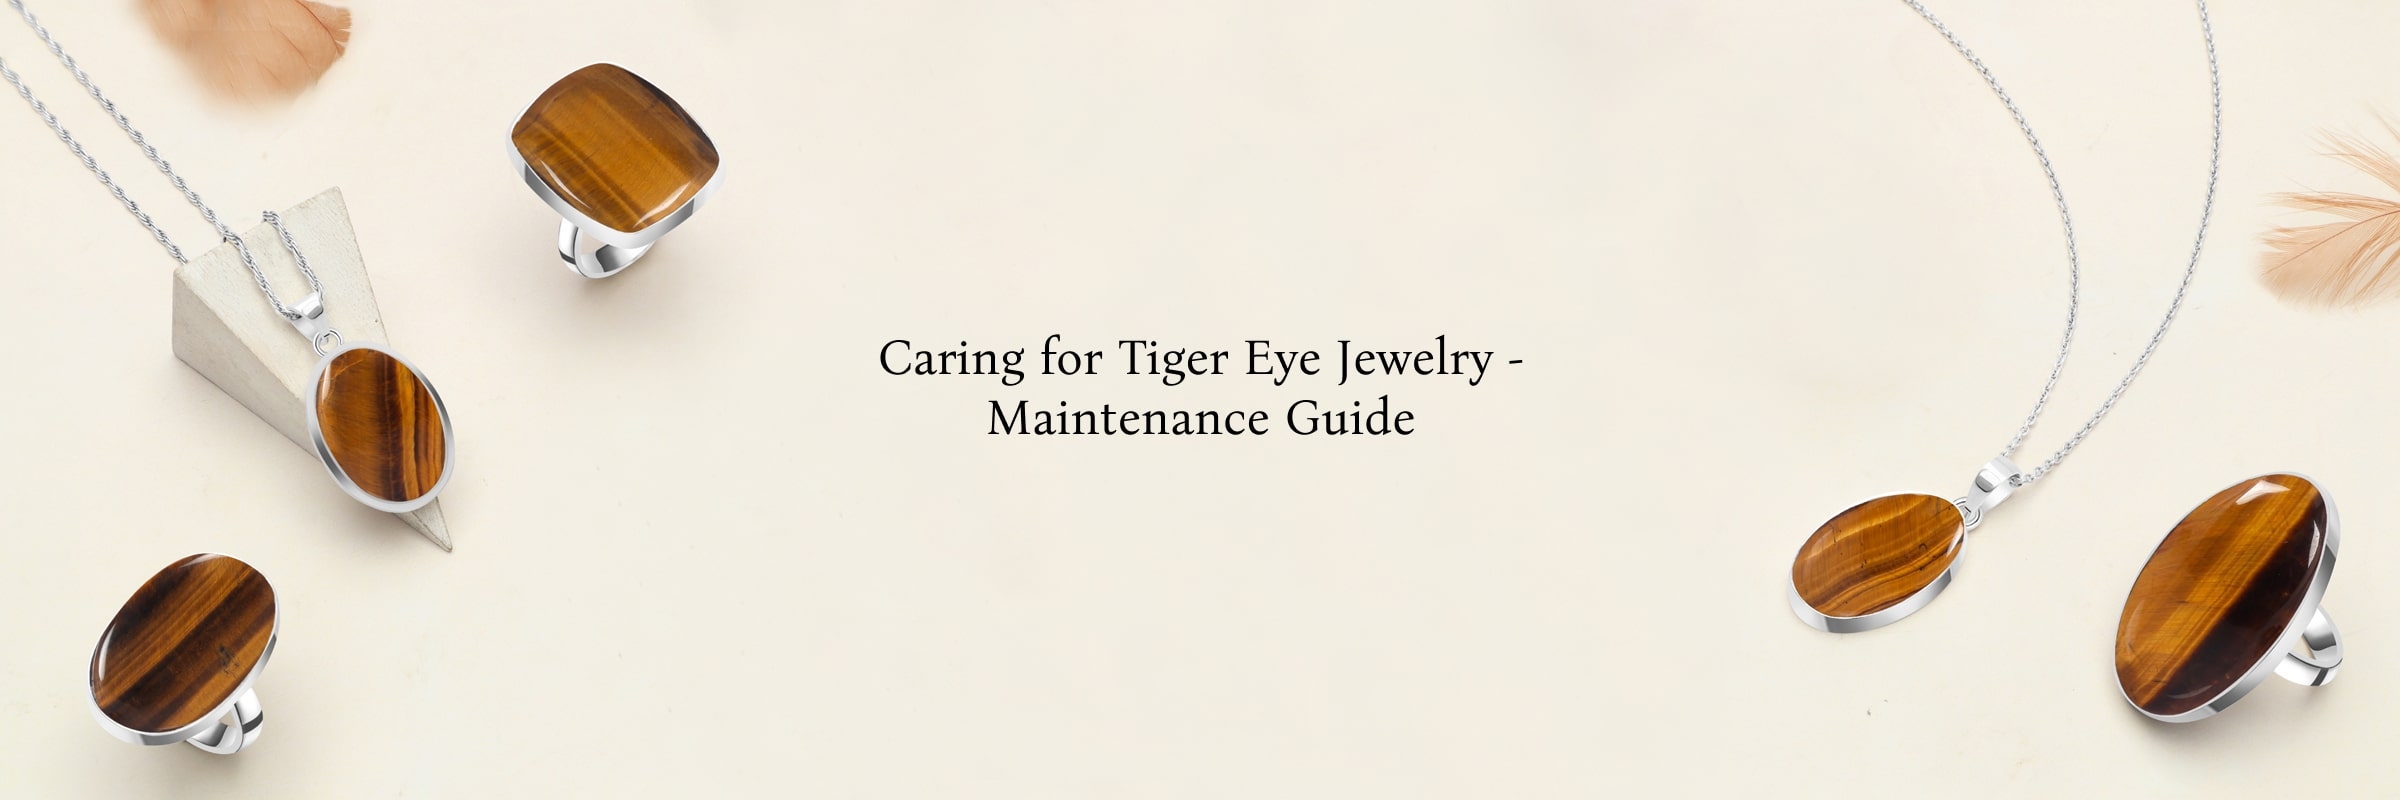 How to Care & Maintain Your Tiger Eye Jewelry?